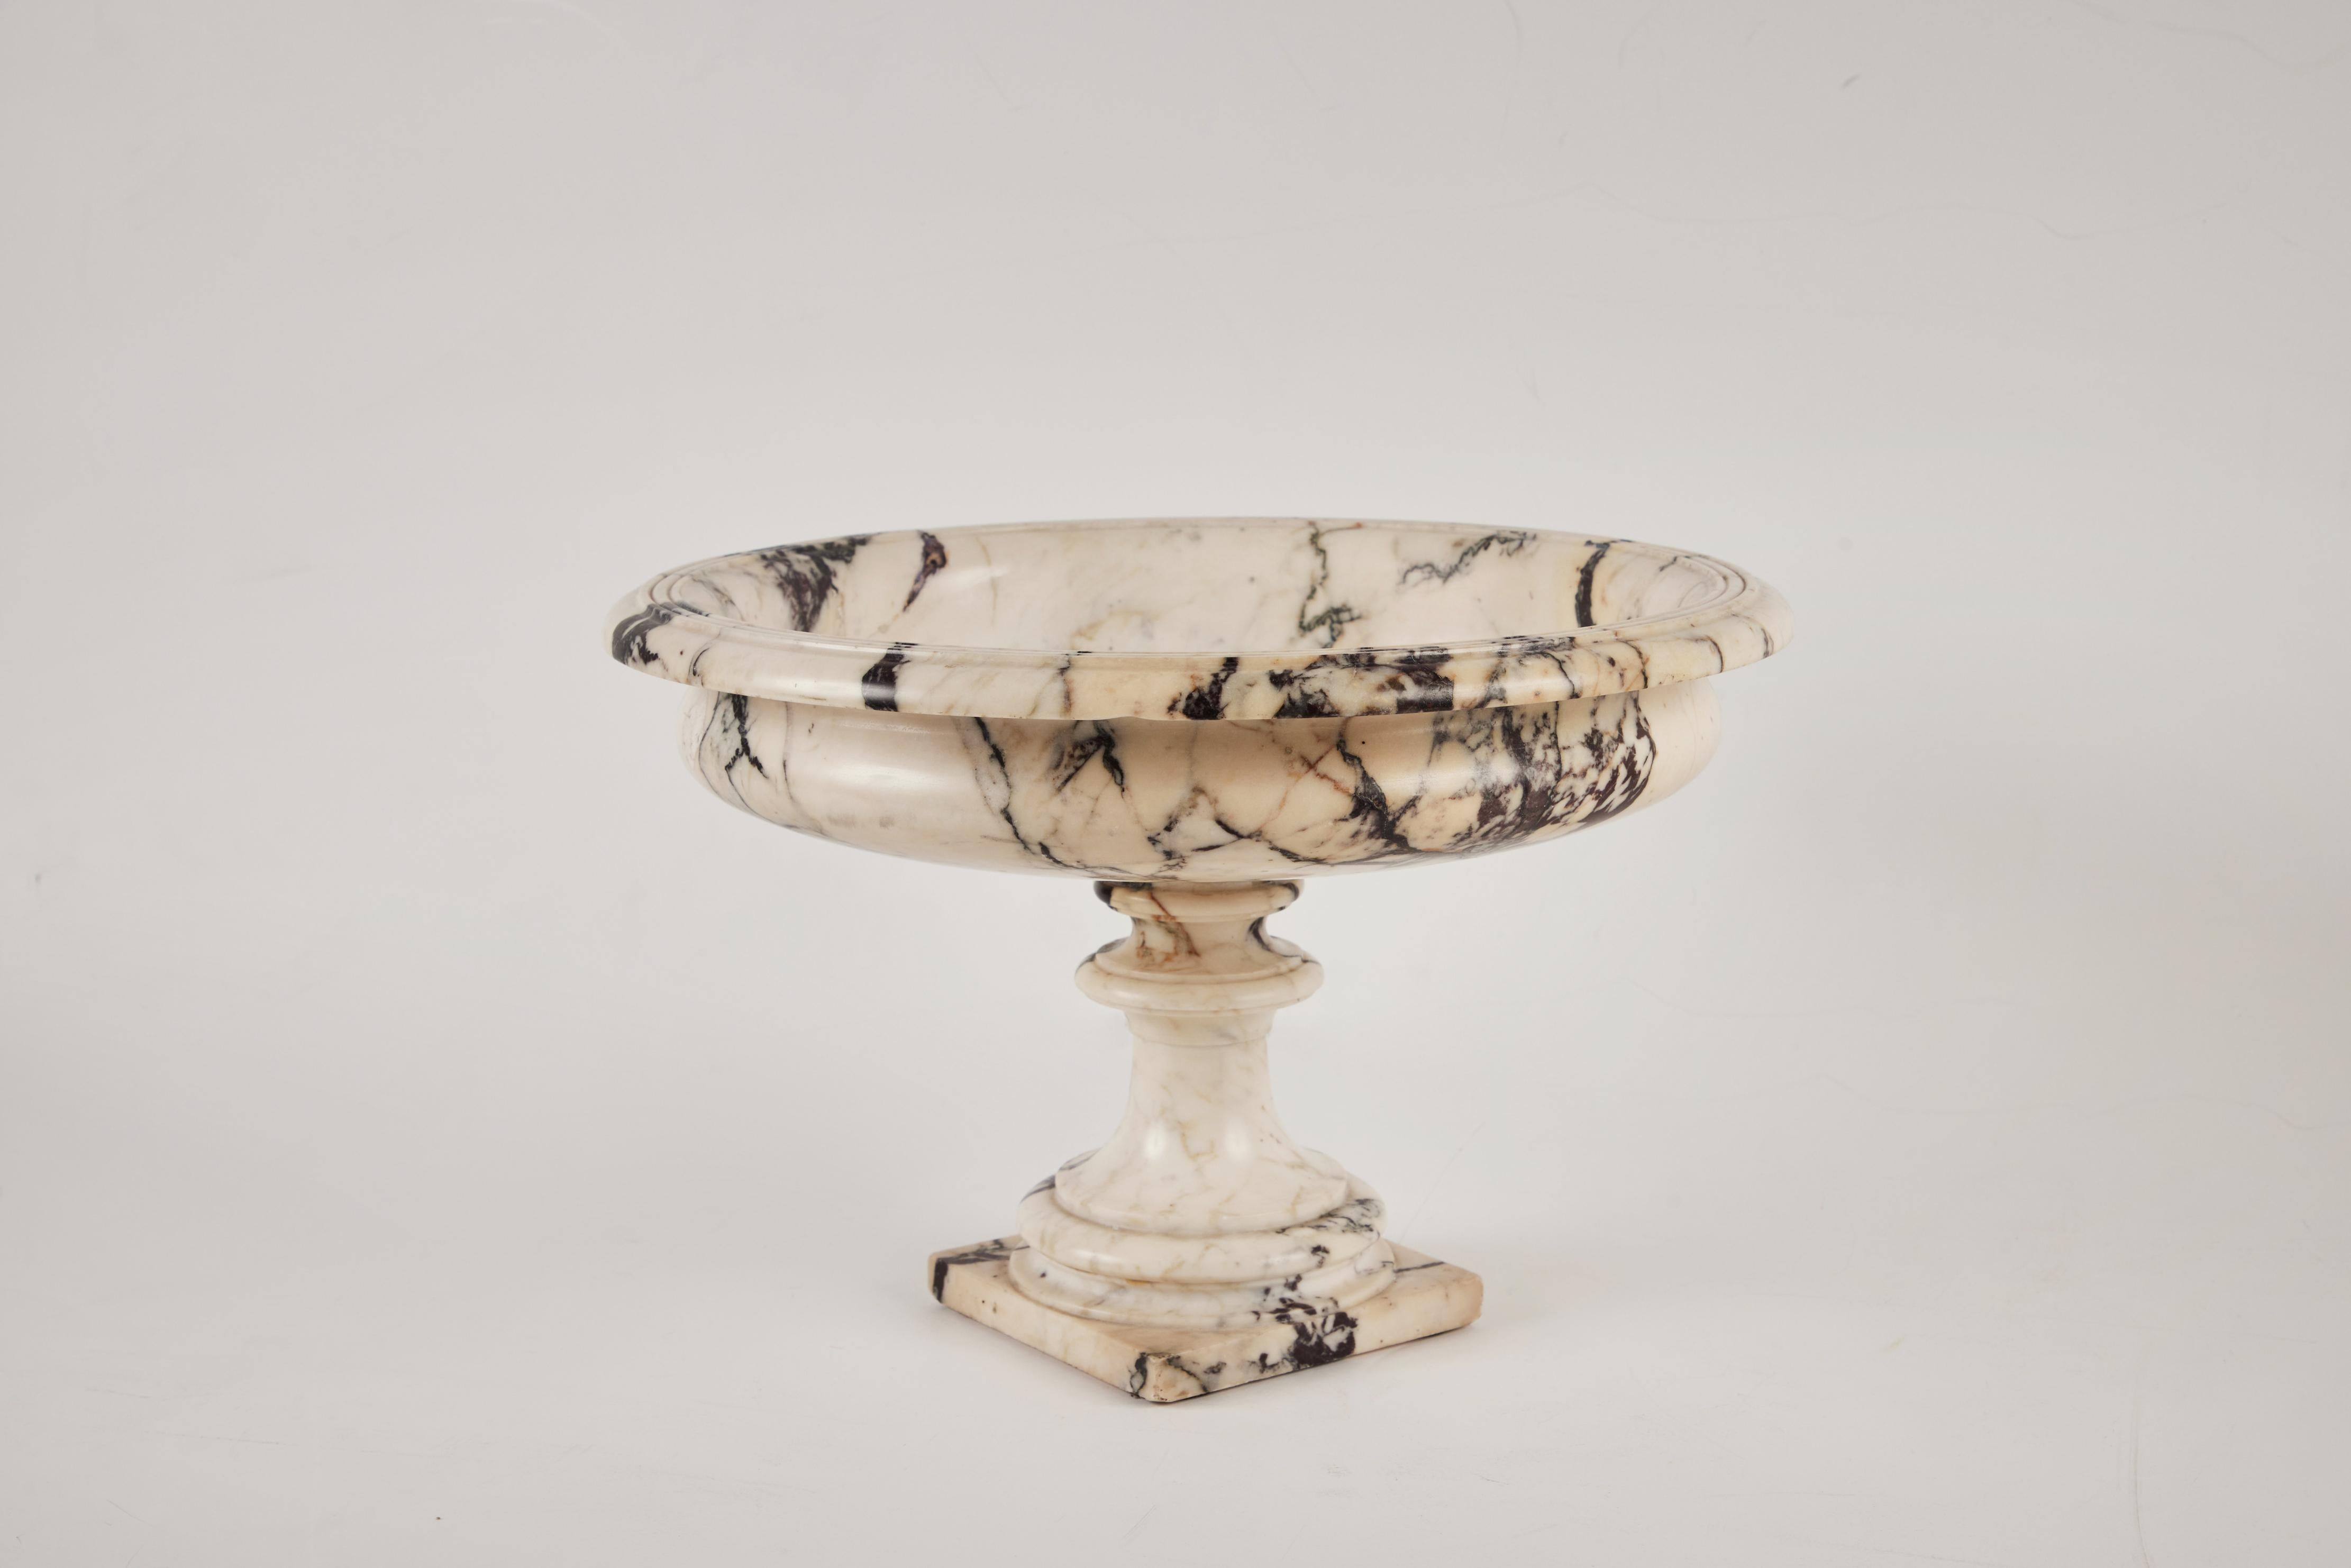 Neoclassical Veined Marble Tazza In Good Condition For Sale In Newport Beach, CA